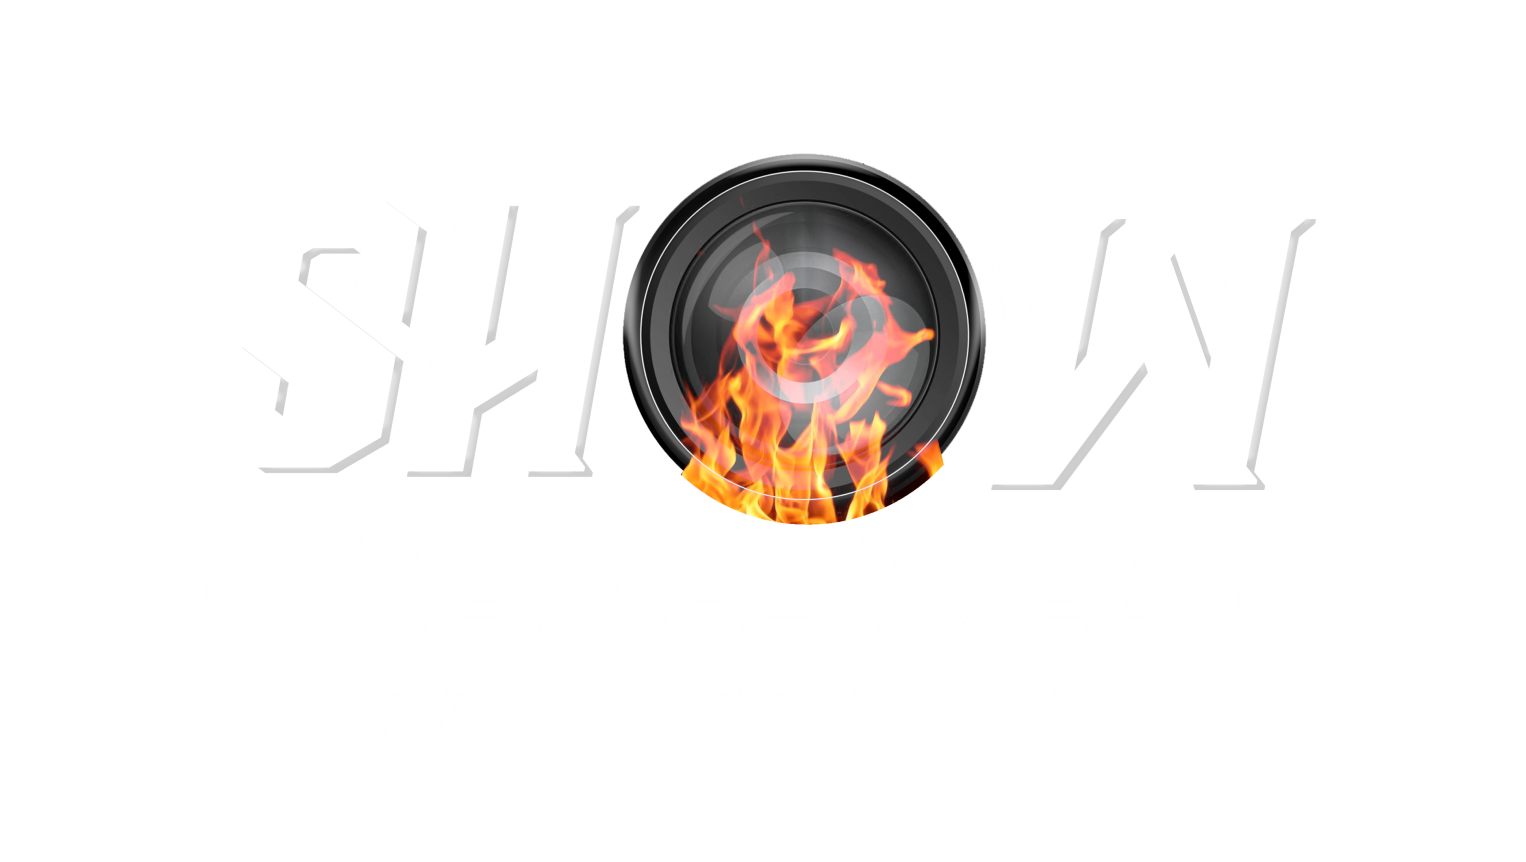 ShowThemFlames Productions